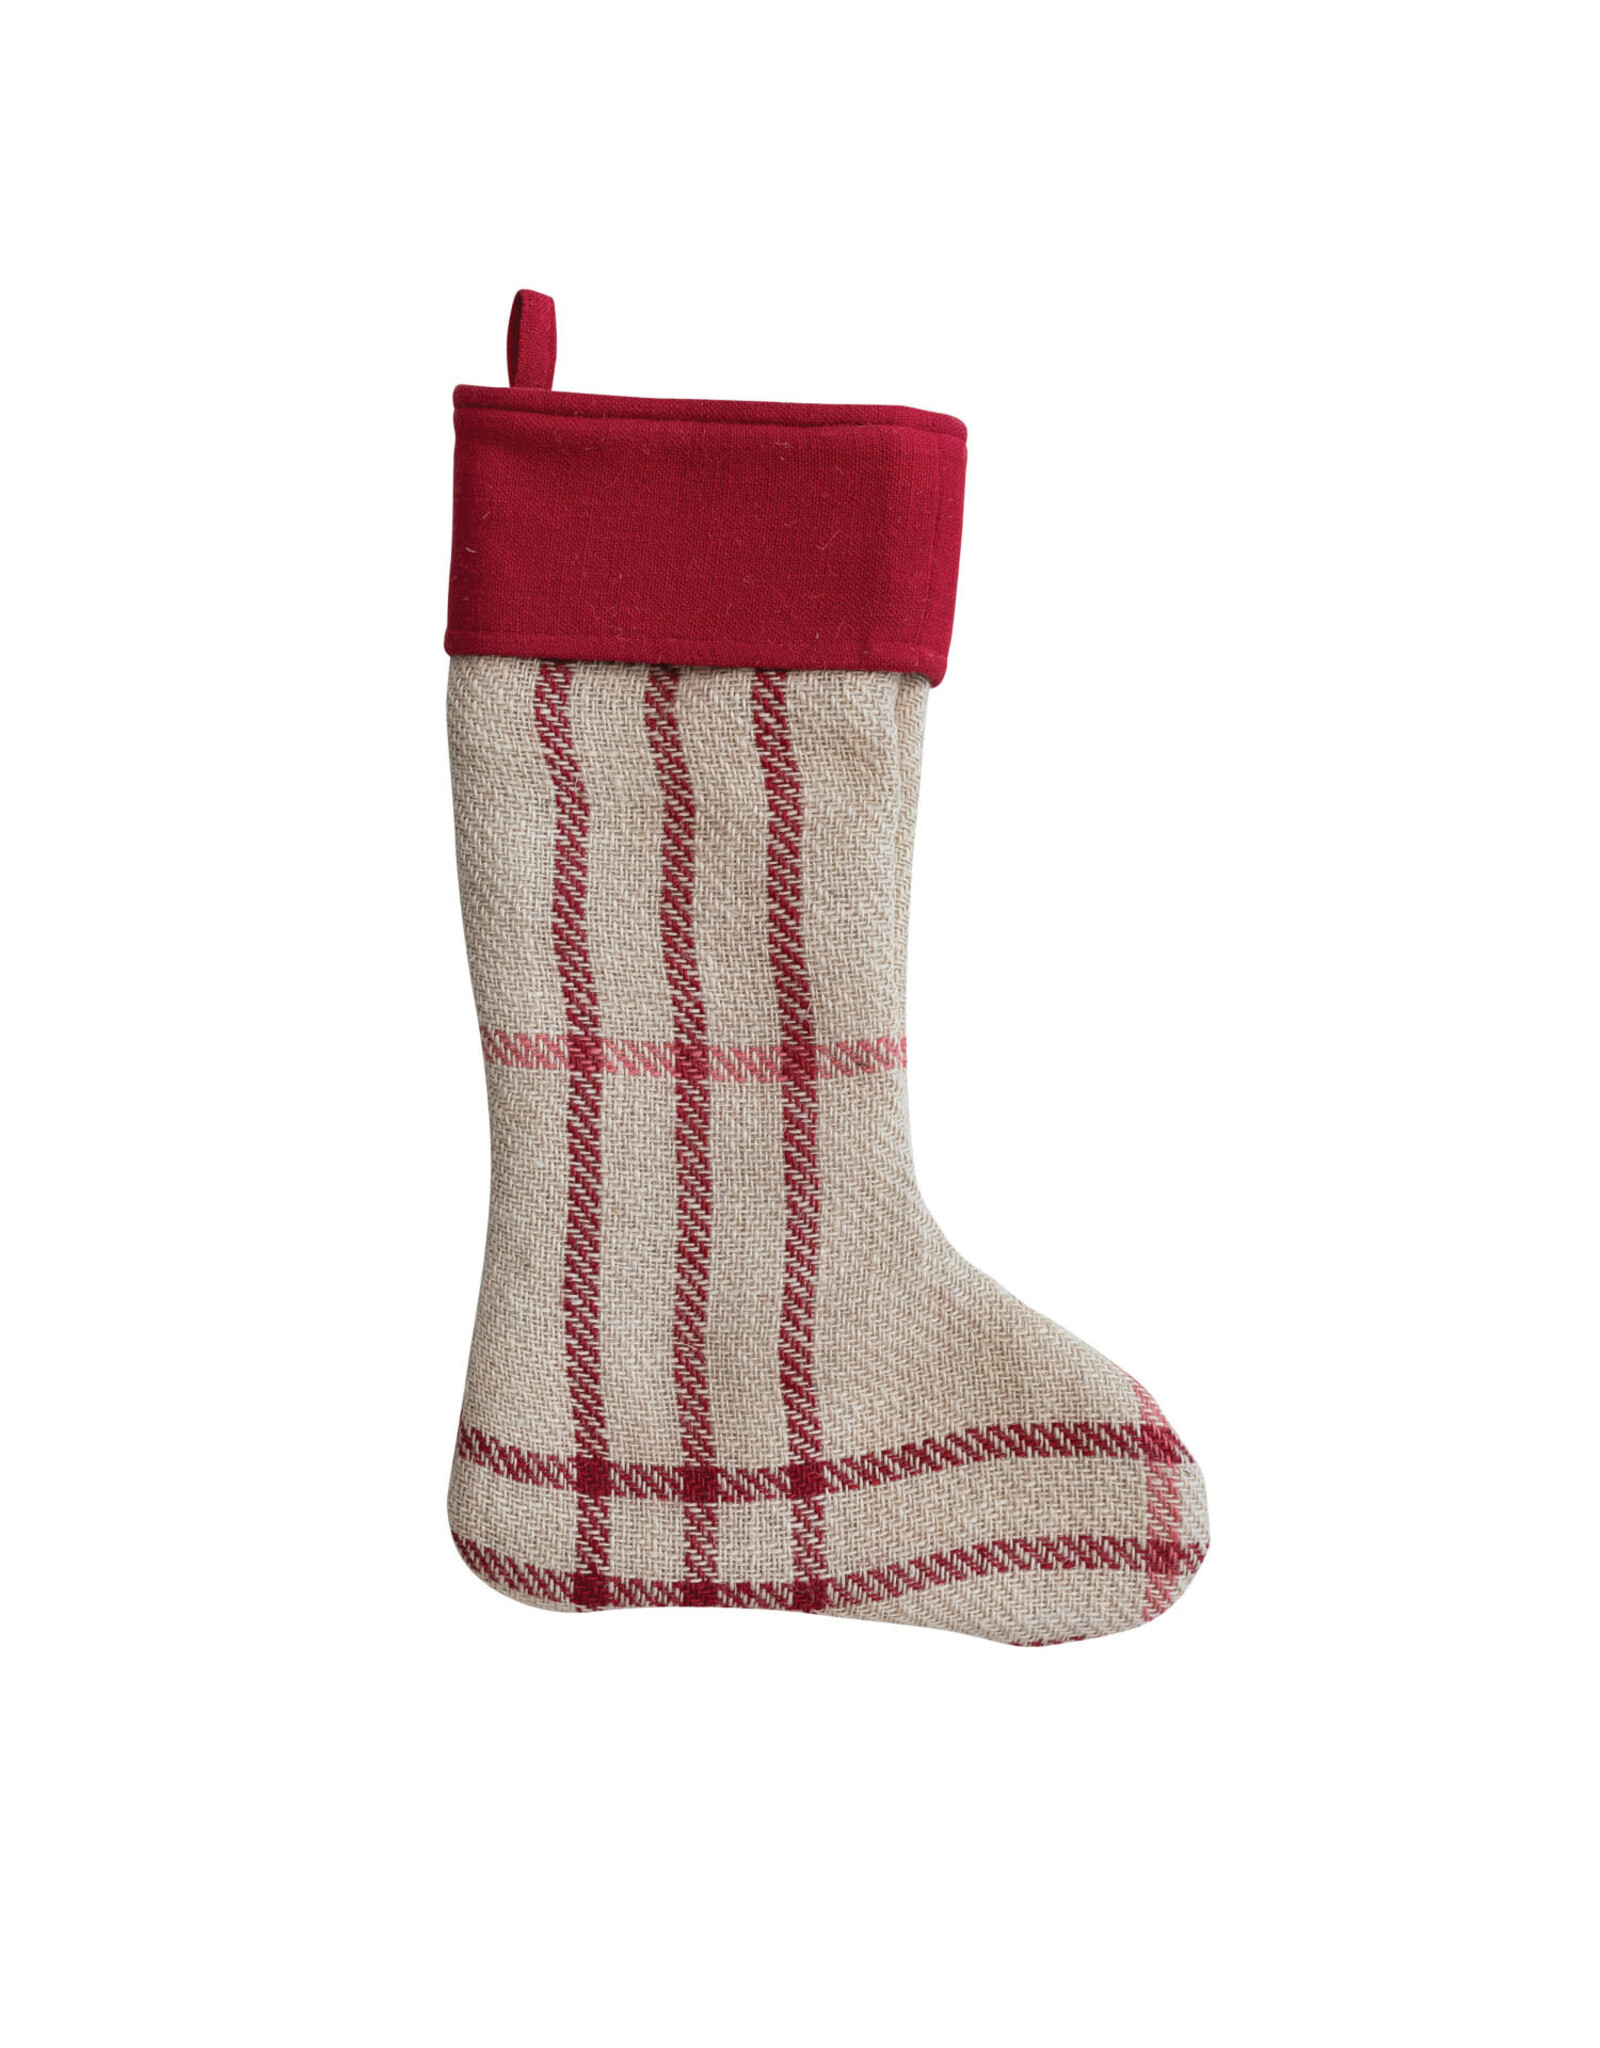 20"H Woven Jute Stocking w/ Cotton Cuff, Natural, Red & Pink Plaid XS2413